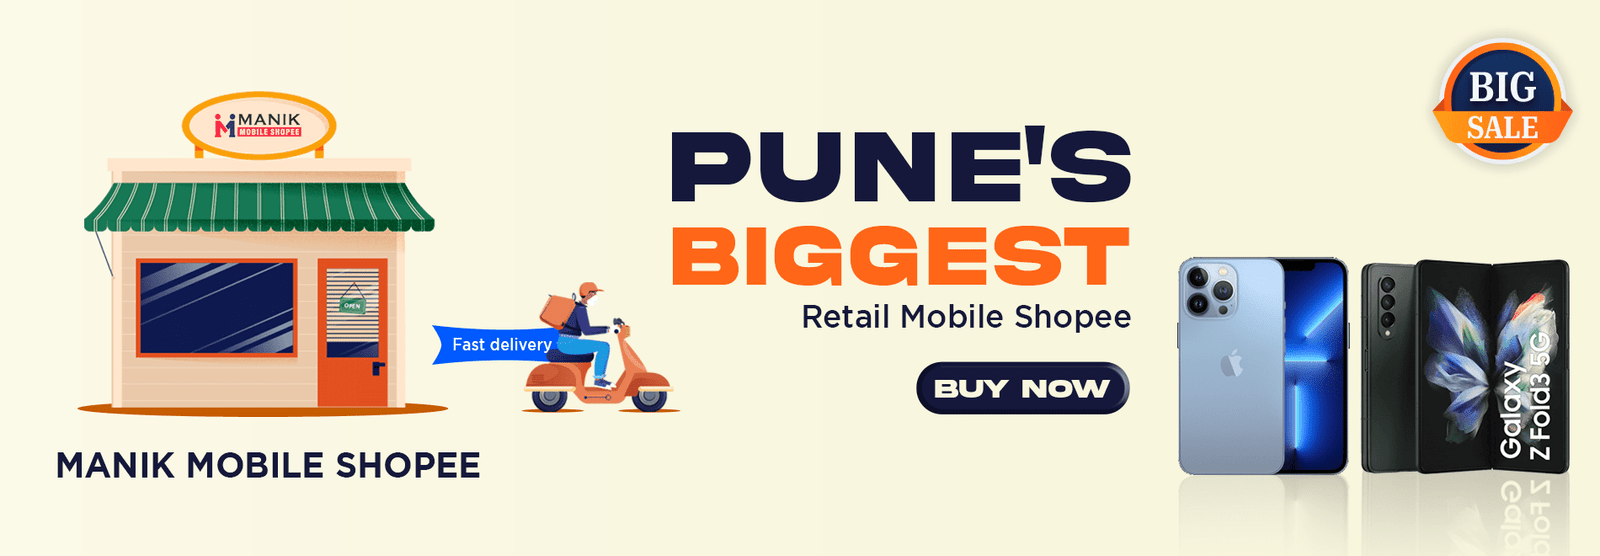 best_mobile_shop_in_pune_1